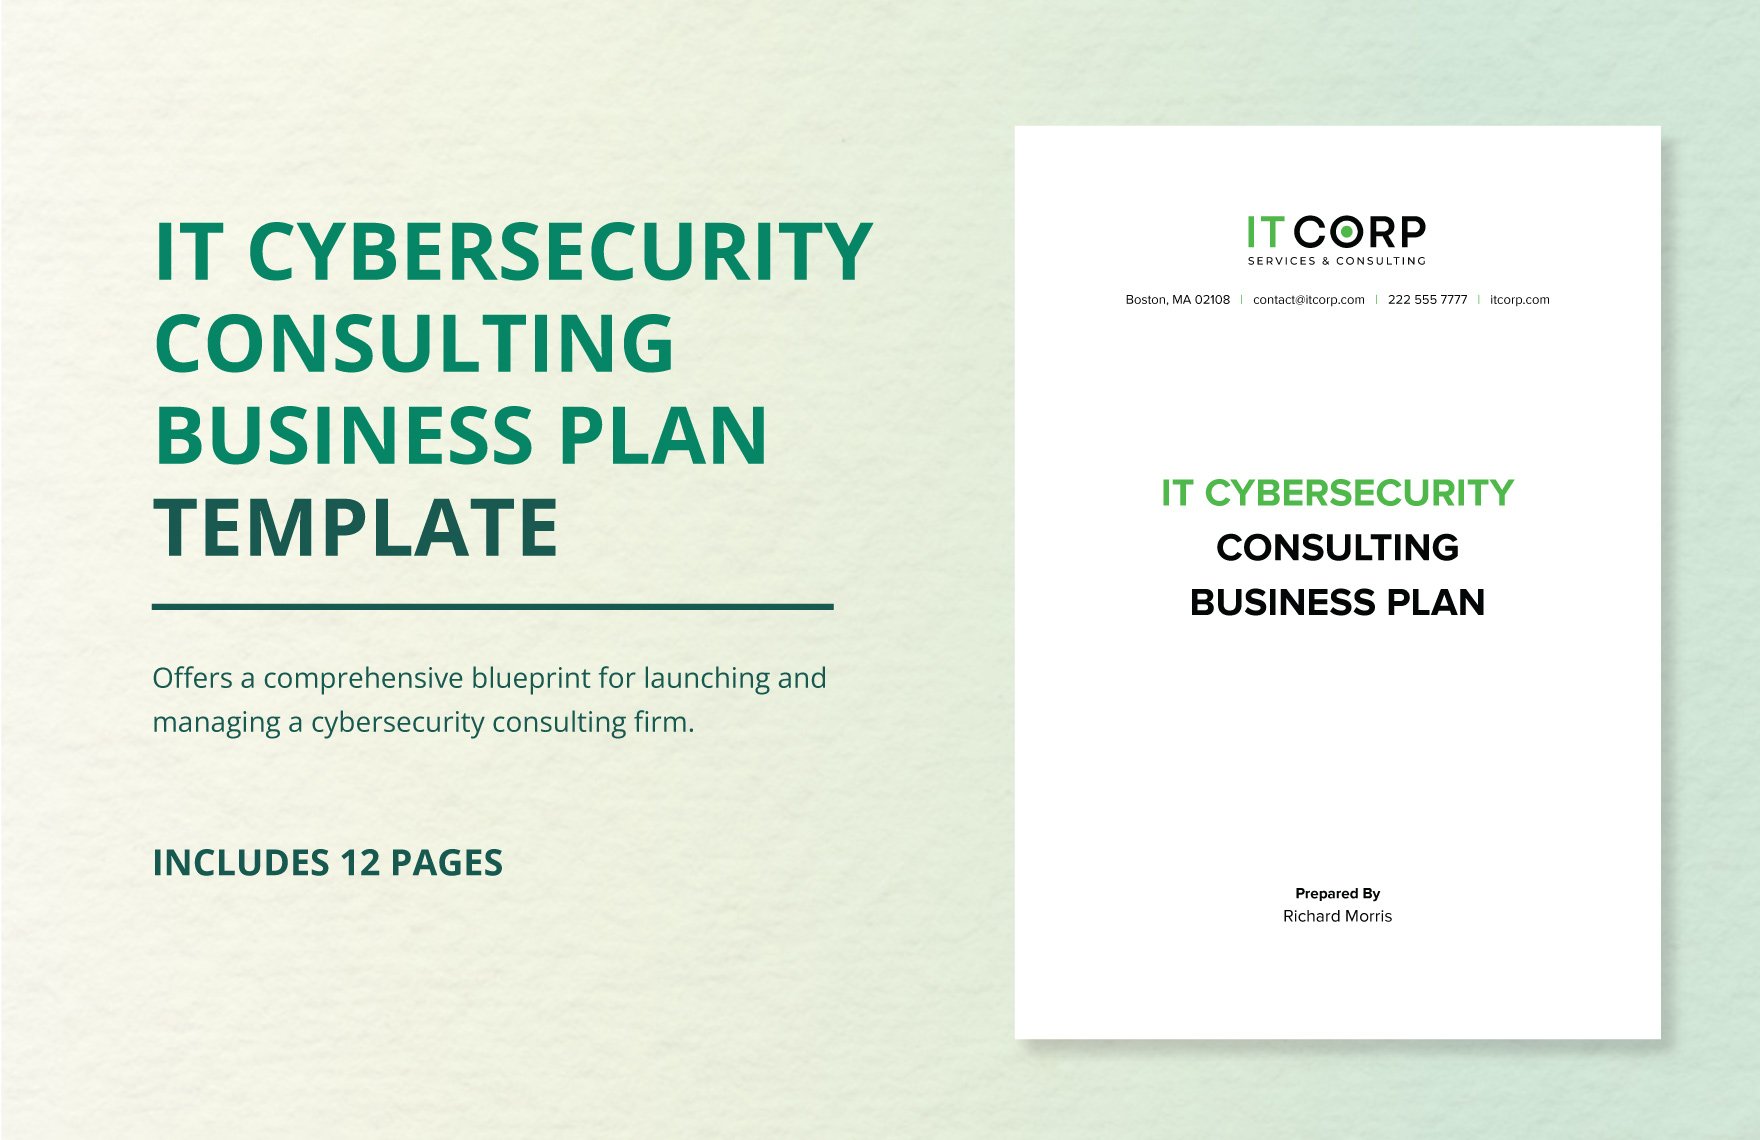 IT Cybersecurity Consulting Business Plan Template